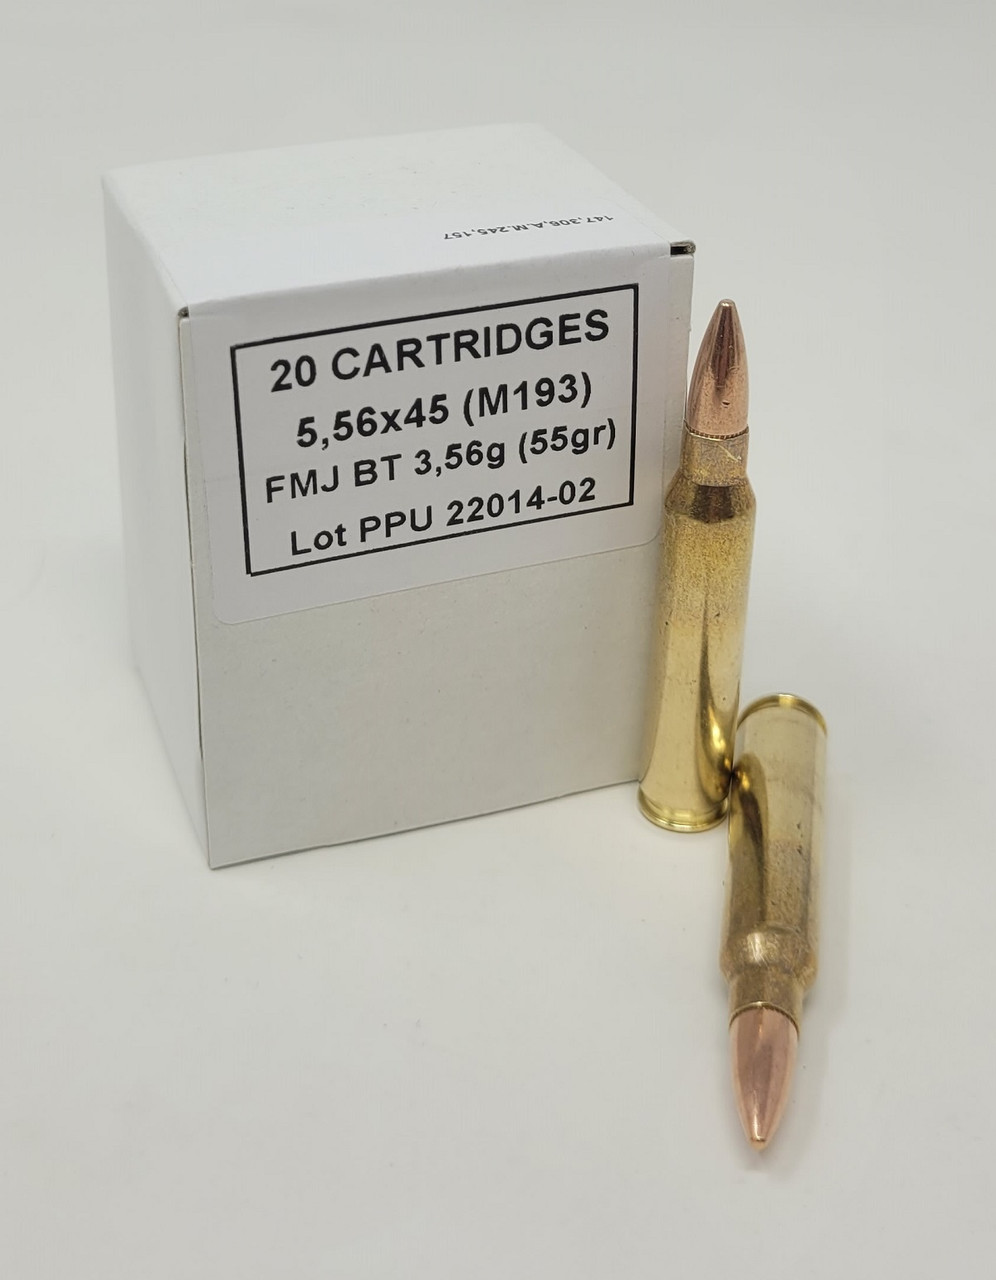 b003) 5.56 NATO by Wolf Ammunition Co., WOLF 556 H/S, BRASS CASE M193,  55 gr. FMJ, Made in Taiwan, One Cartridge not a Box. - Ammo-One1